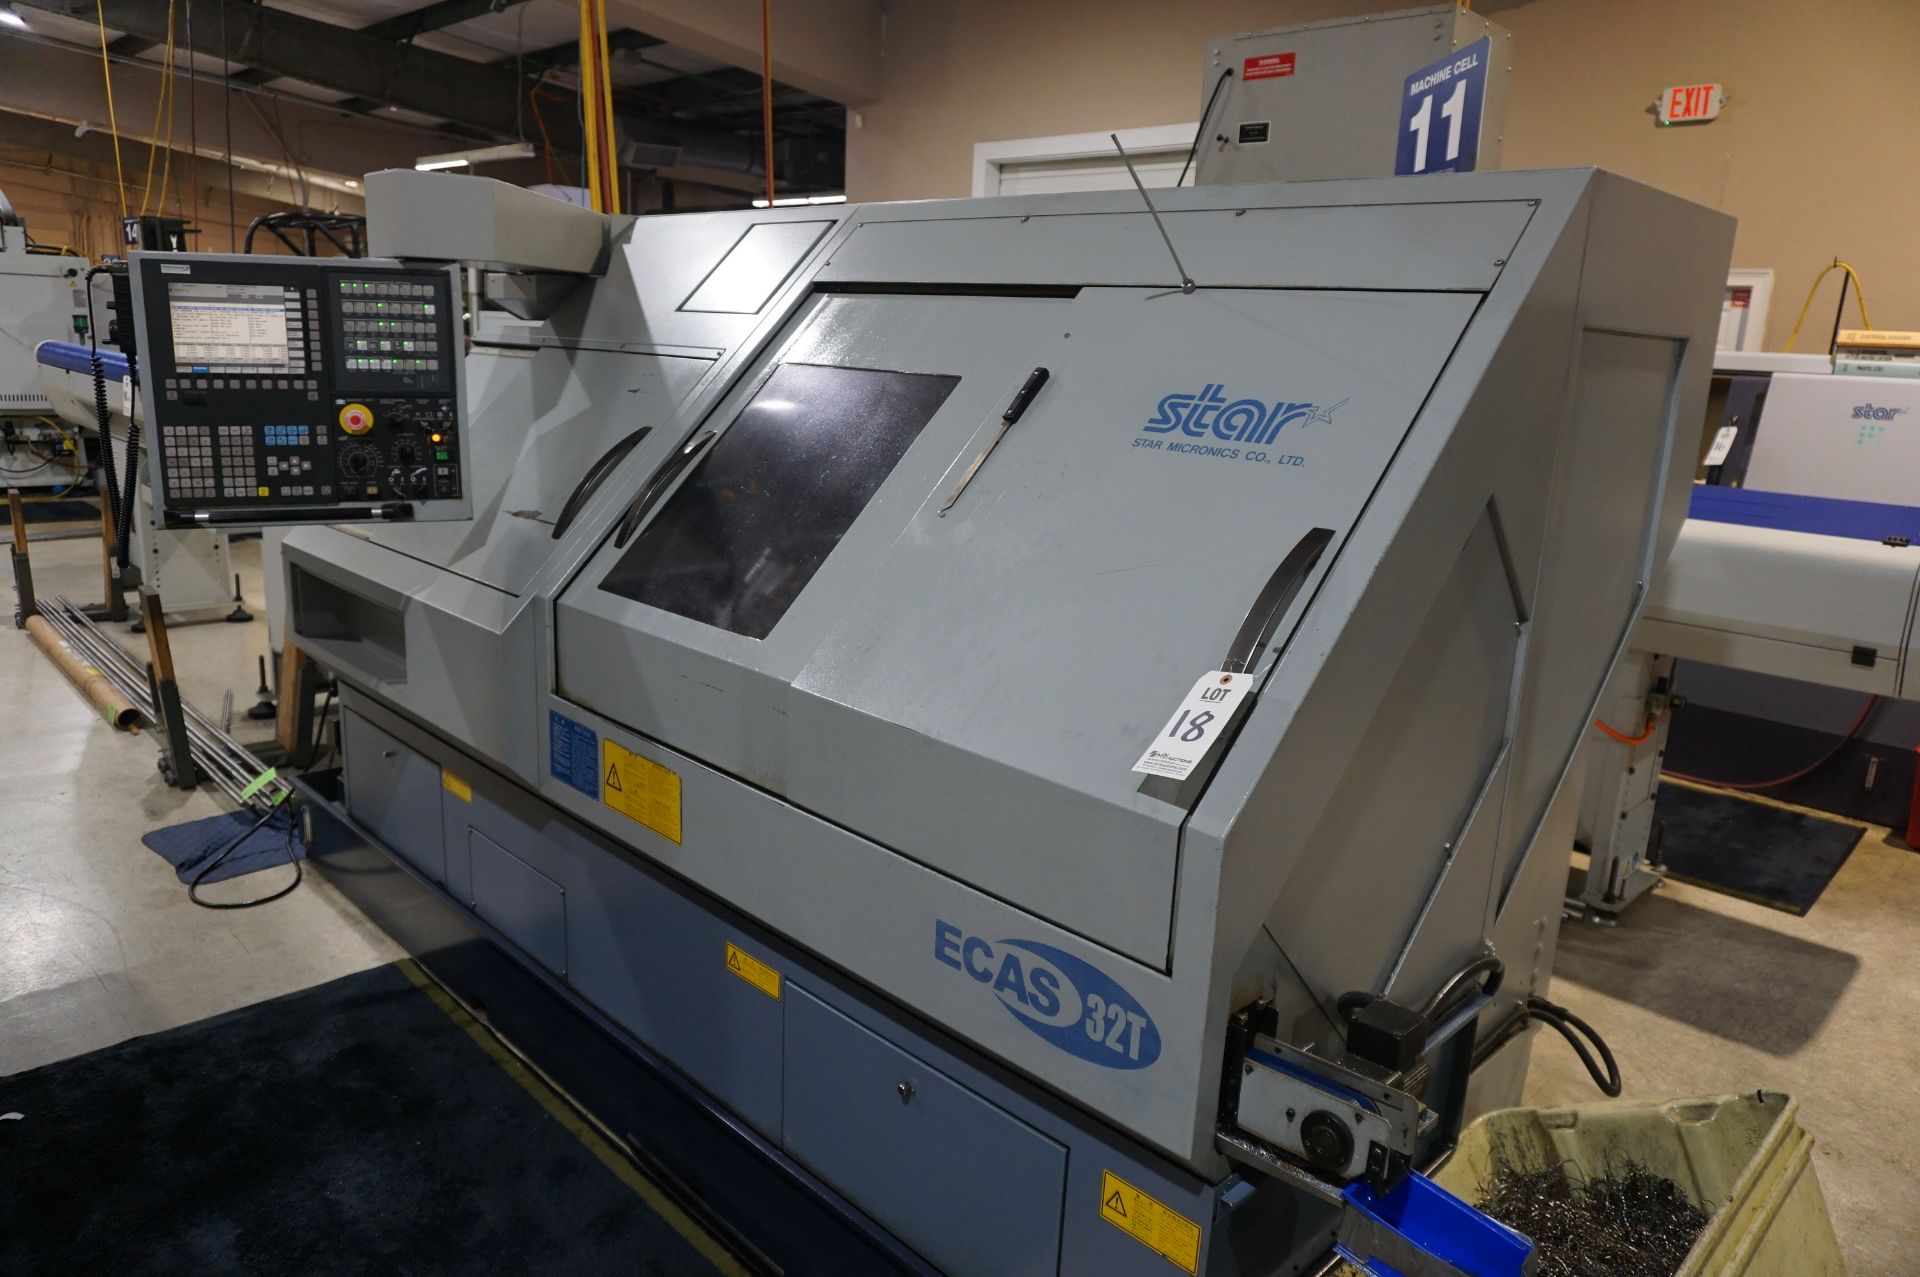 2005 STAR ECAS-32T MULTI AXIS AUTOMATIC SWISS LATHE, S/N 0113 (016), 11 AXIS, ONLY ~13,450 CUT